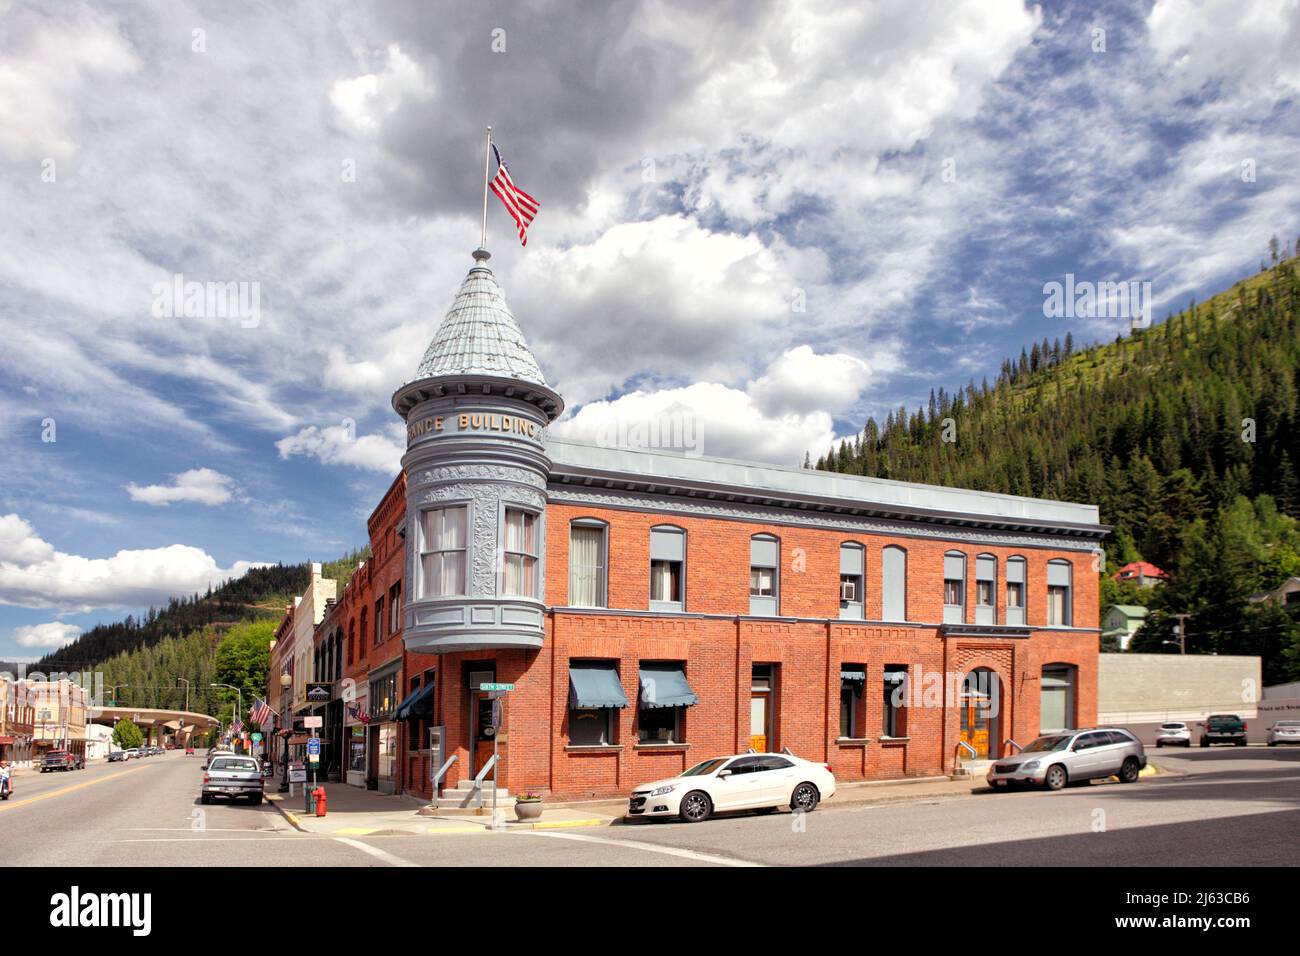 The intersection of Sixth and Bank Streets in Wallace, Idaho, United States. The buildings pictured are part of the Wallace Historic District, which i Stock Photo